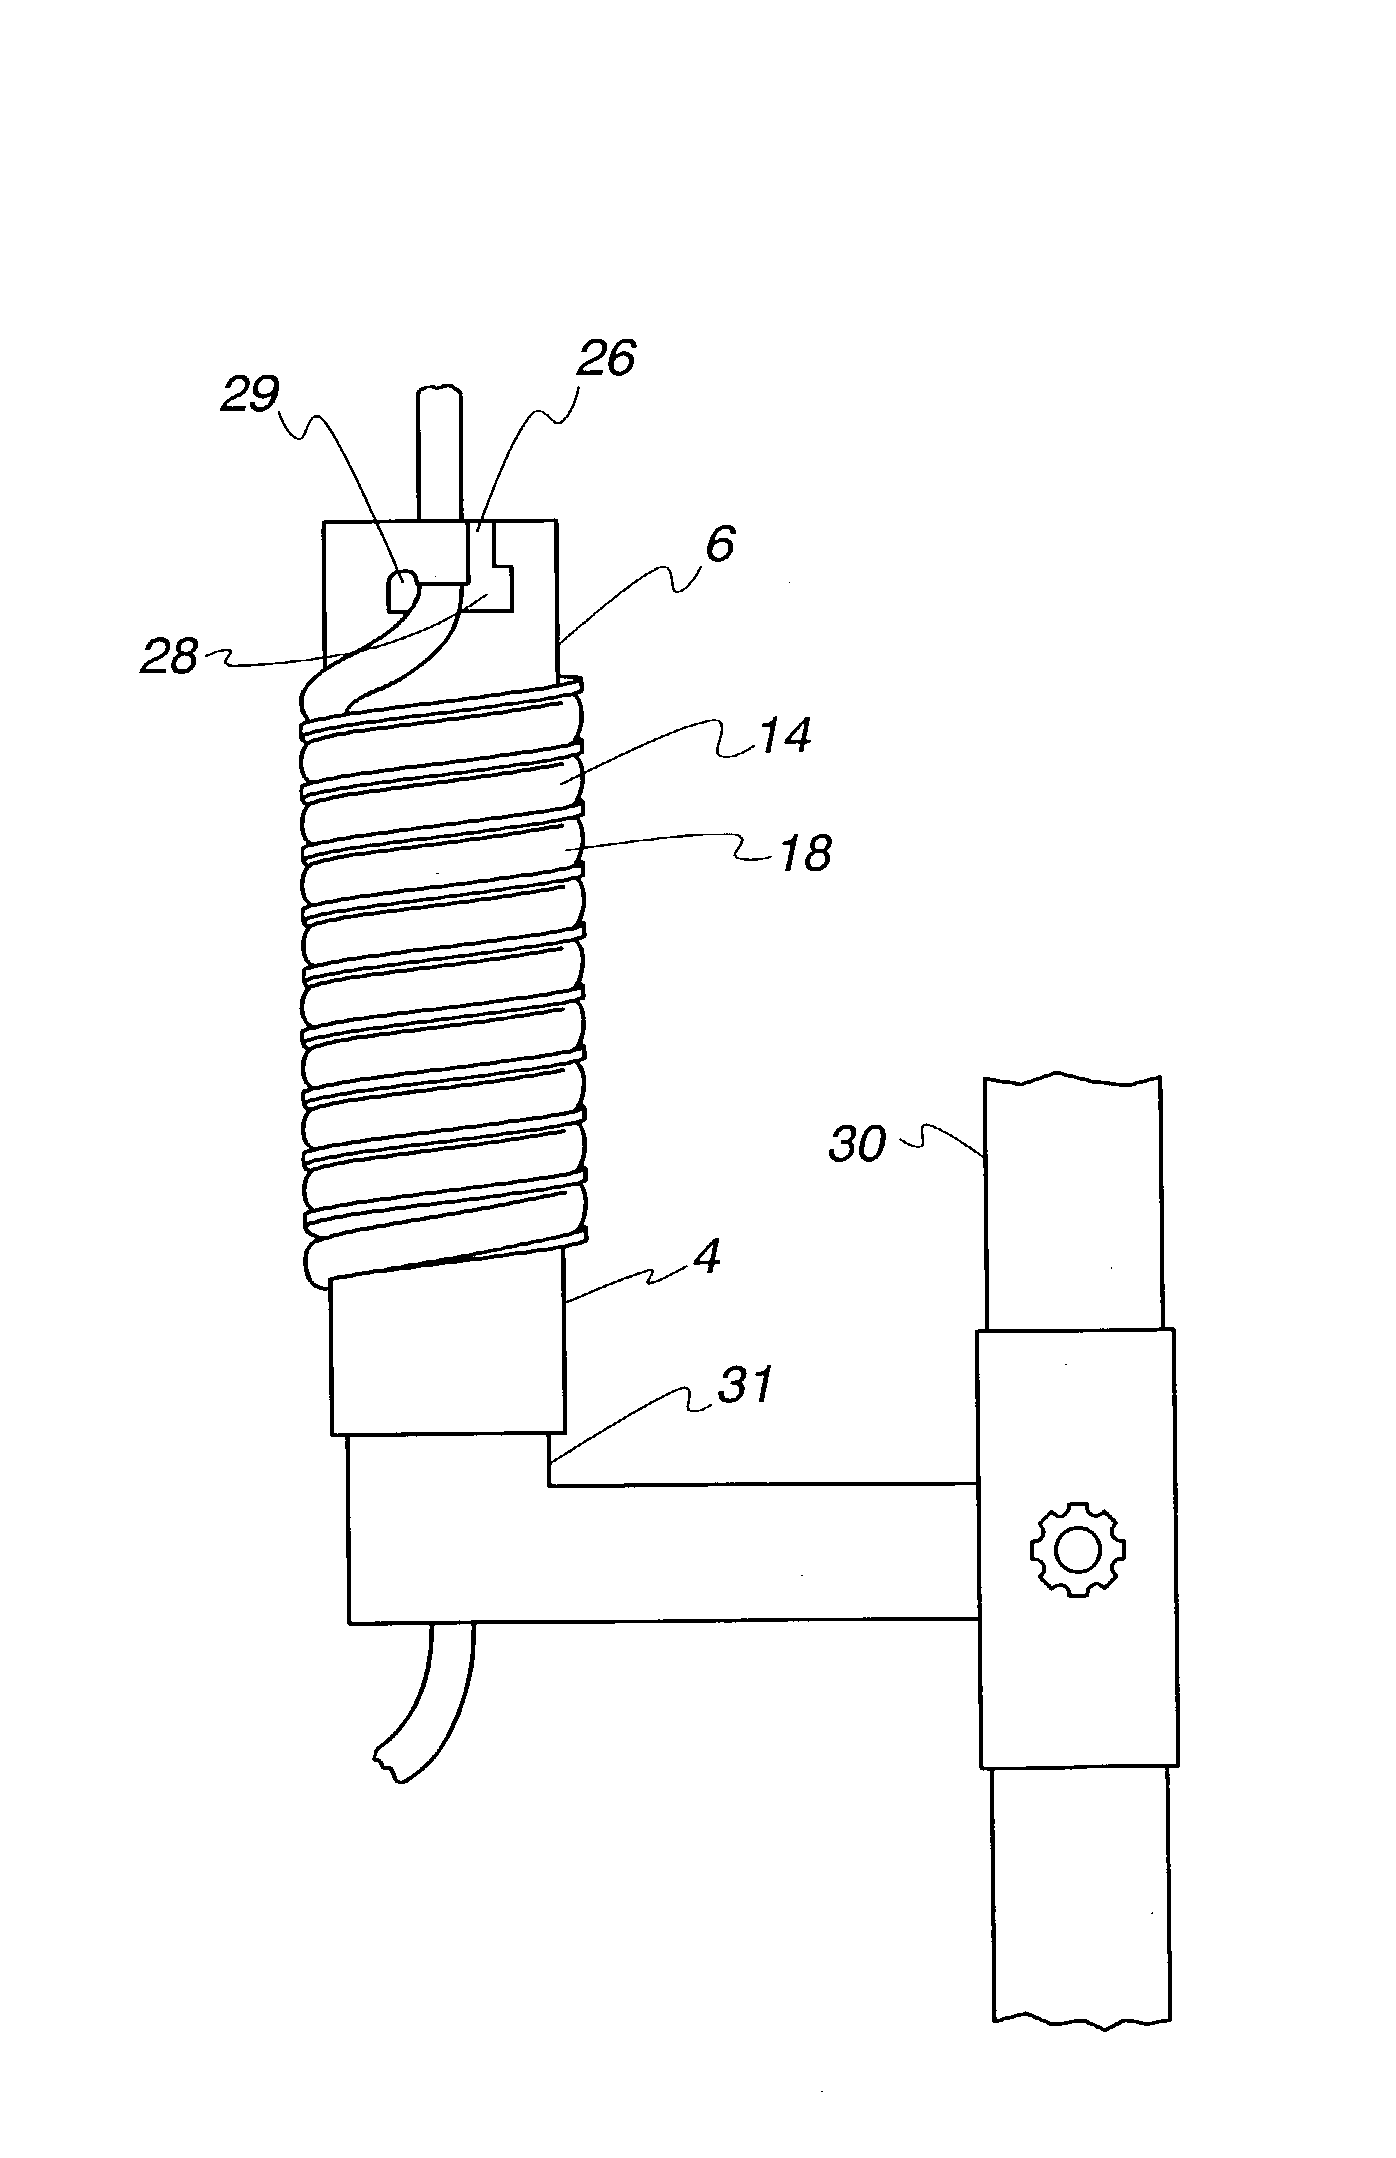 Liquid conductive cooling/heating device and method of use